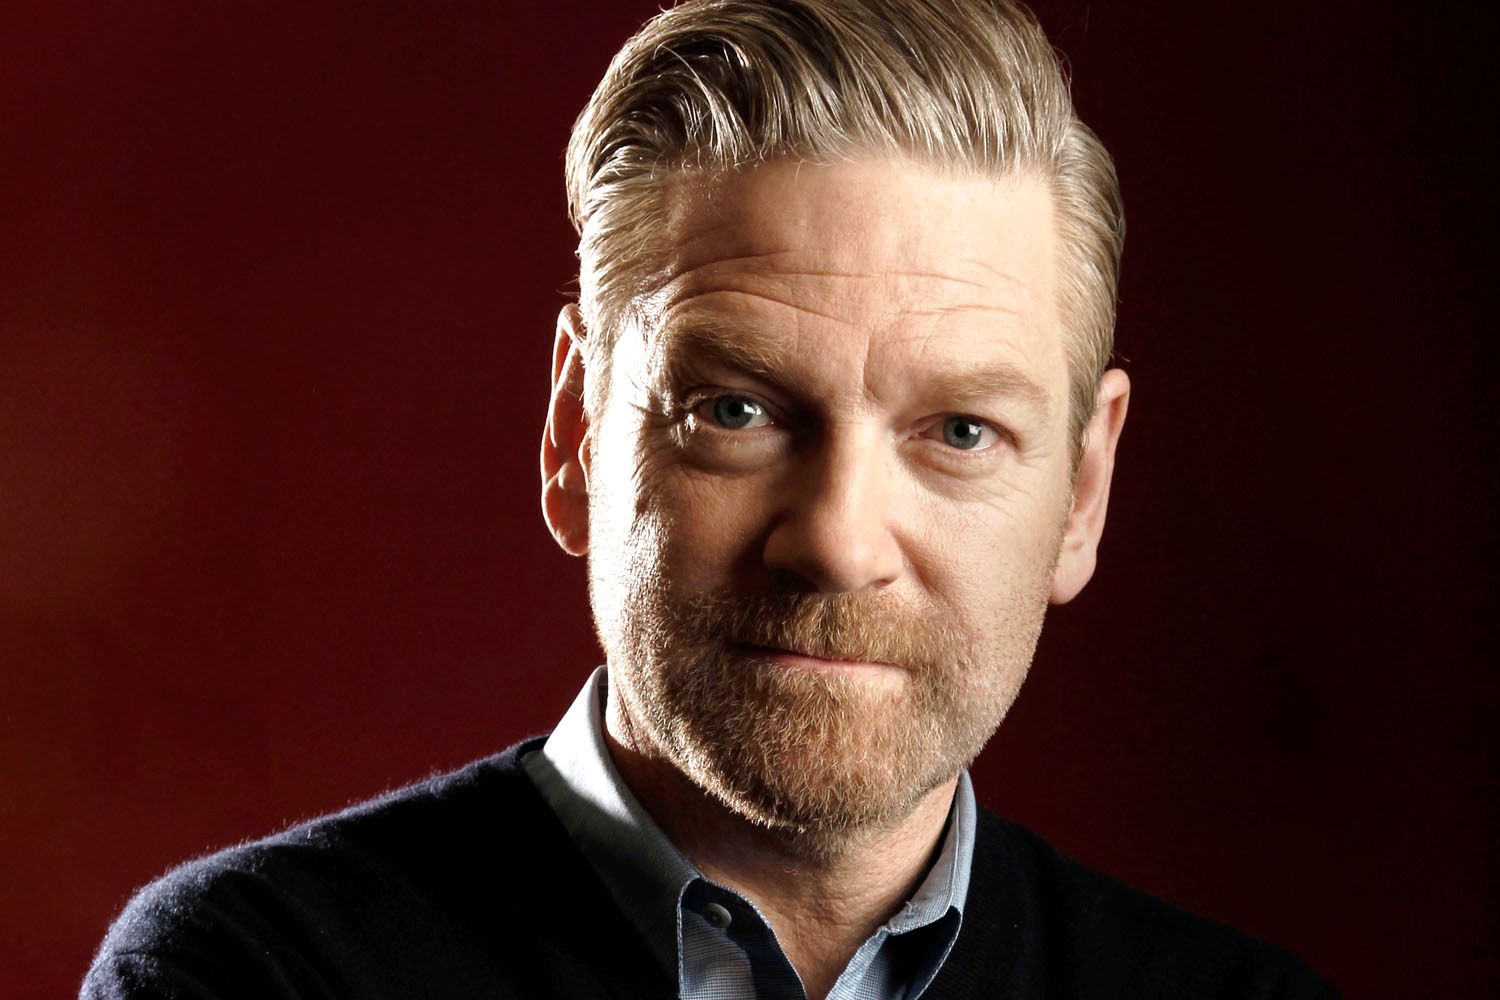 Kenneth Branagh To Direct-Act In ‘Murder on the Orient Express’ Adaptation